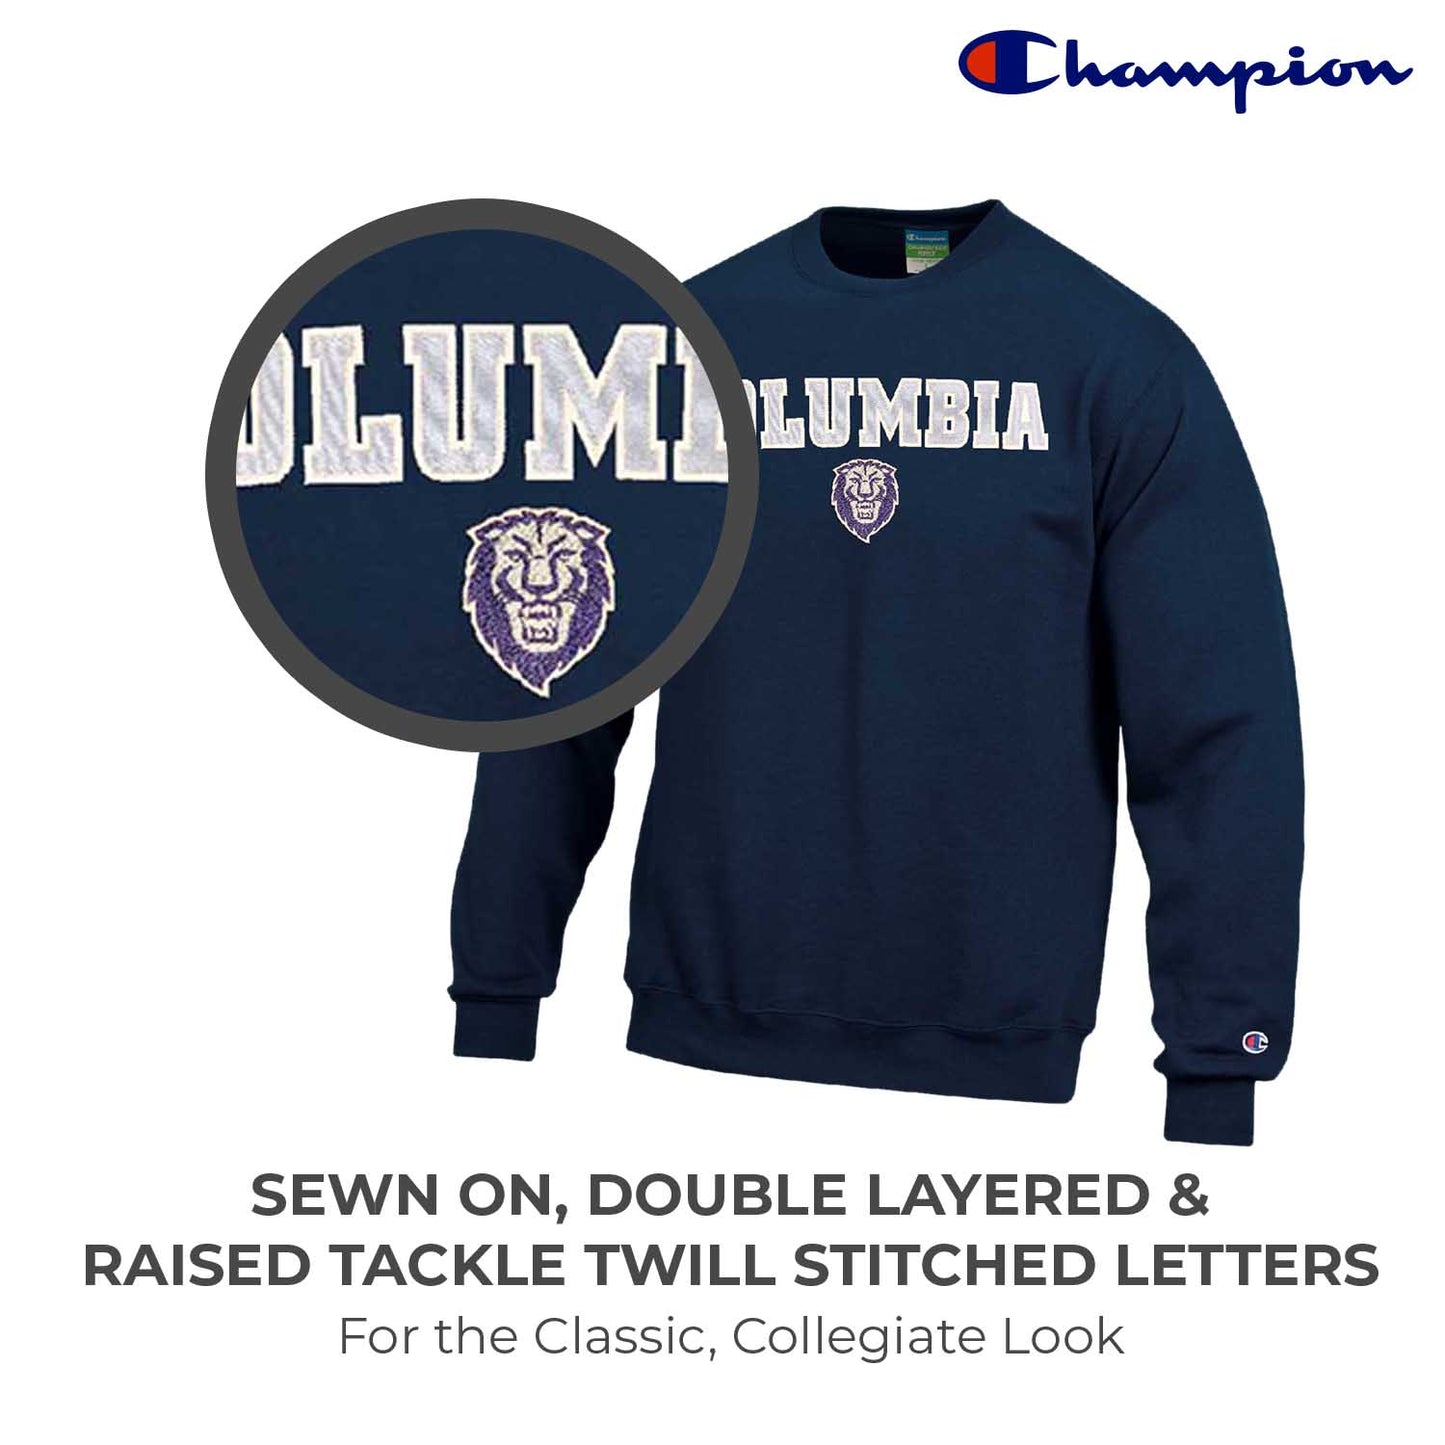 Columbia Lions Adult Tackle Twill Crewneck - Navy